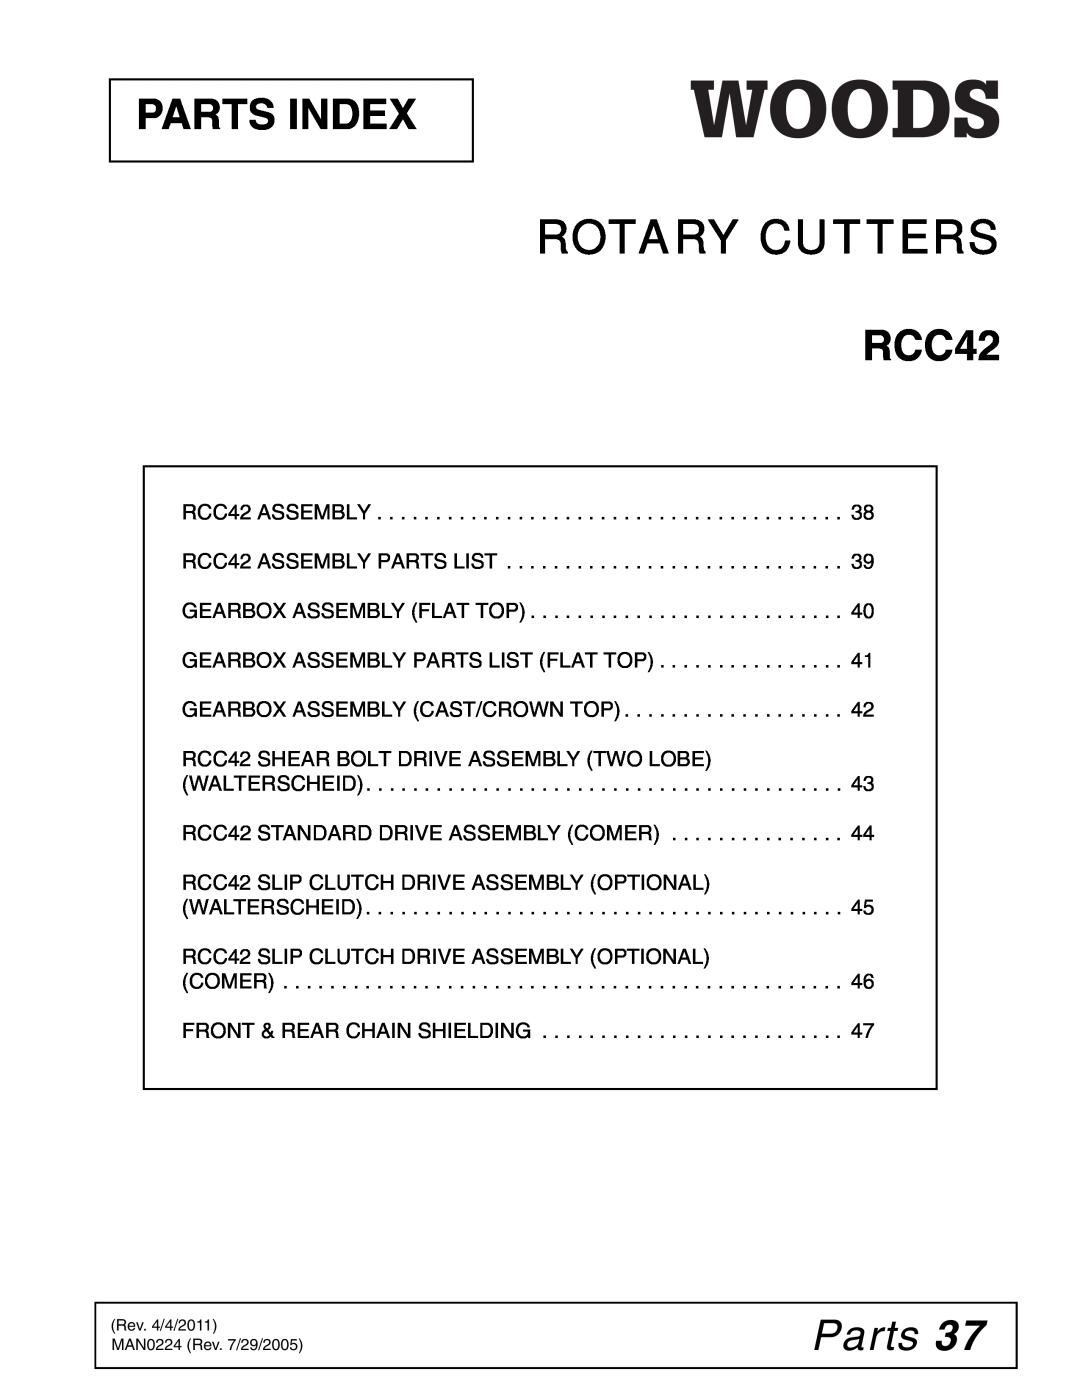 Woods Equipment RCC42 manual Rotary Cutters, Parts Index 